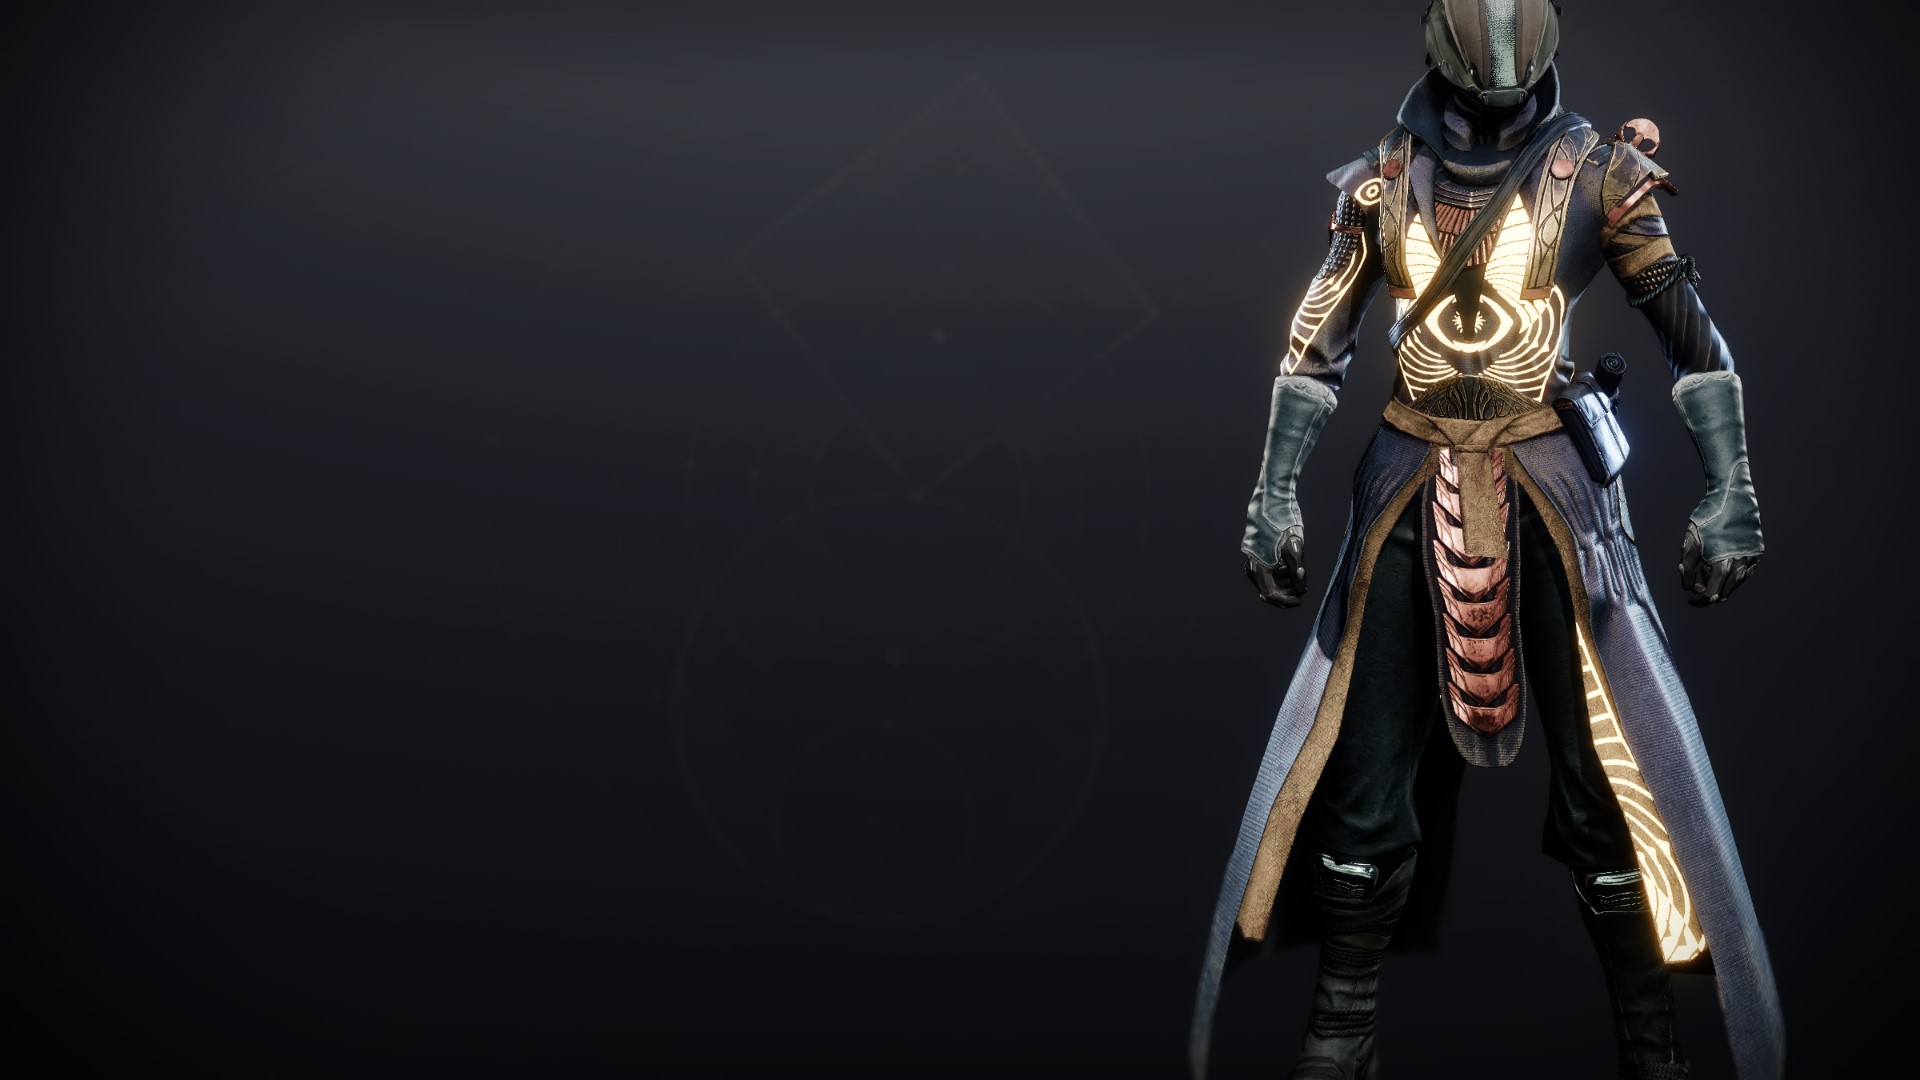 An in-game render of the Pyrrhic Ascent Vestment.